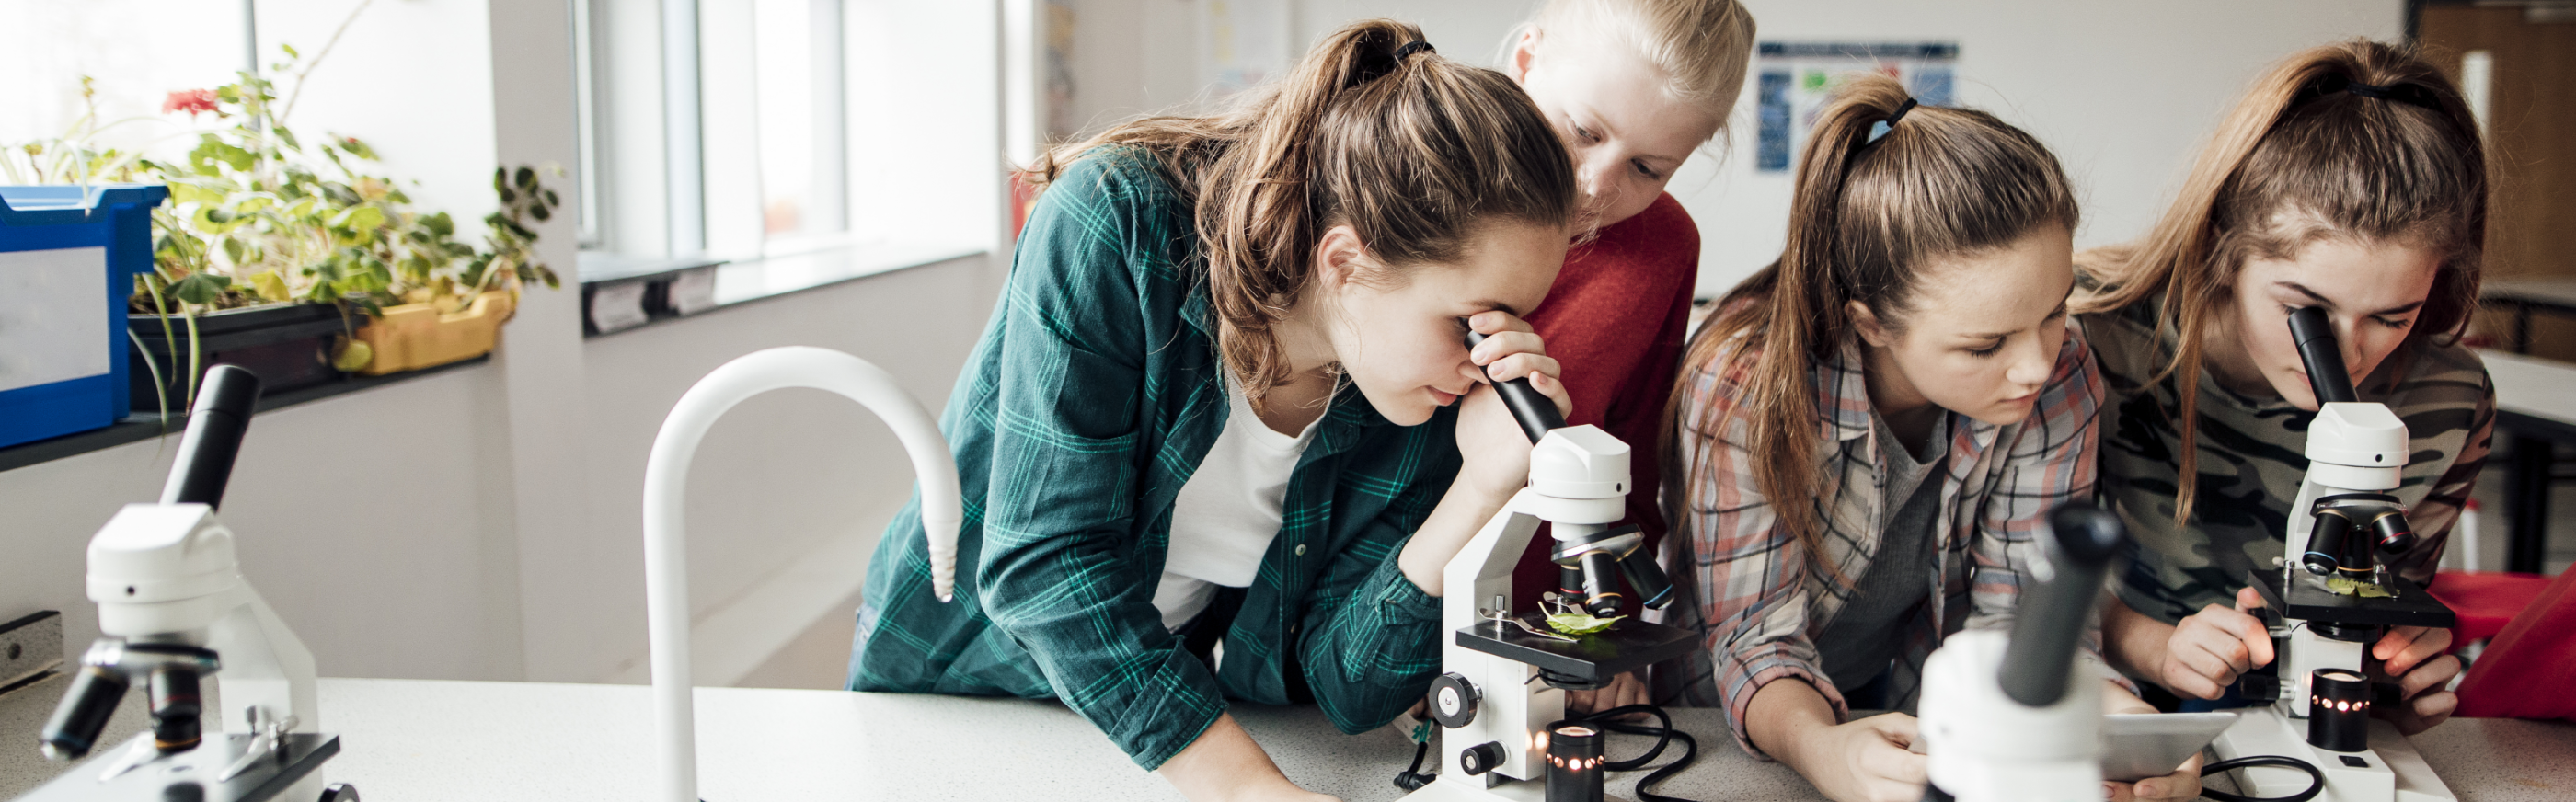 girls and microscopes